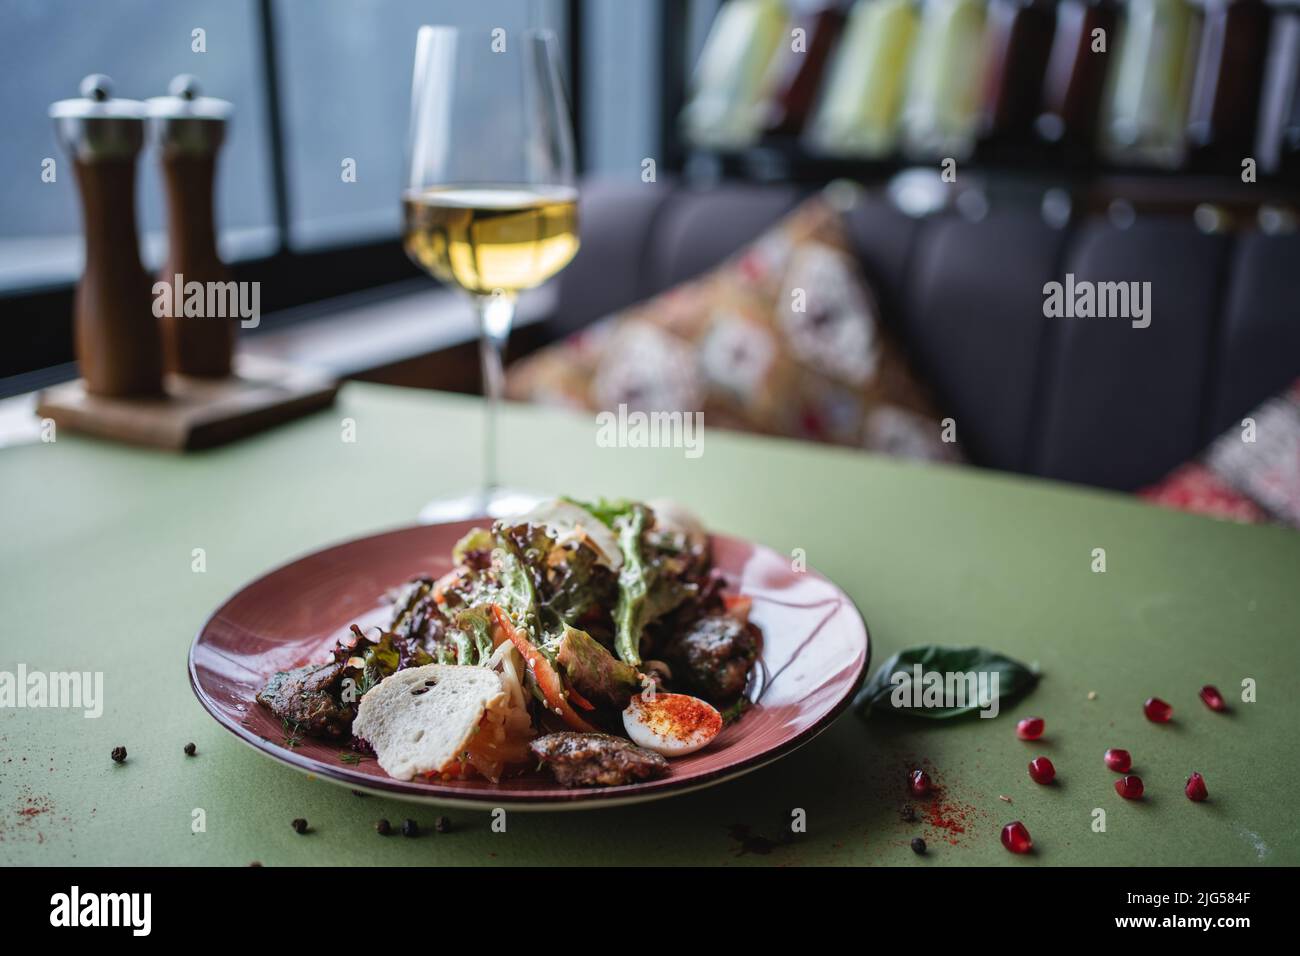 salad with chicken liver, egg and crouton or wine in glass on restaurant table Stock Photo